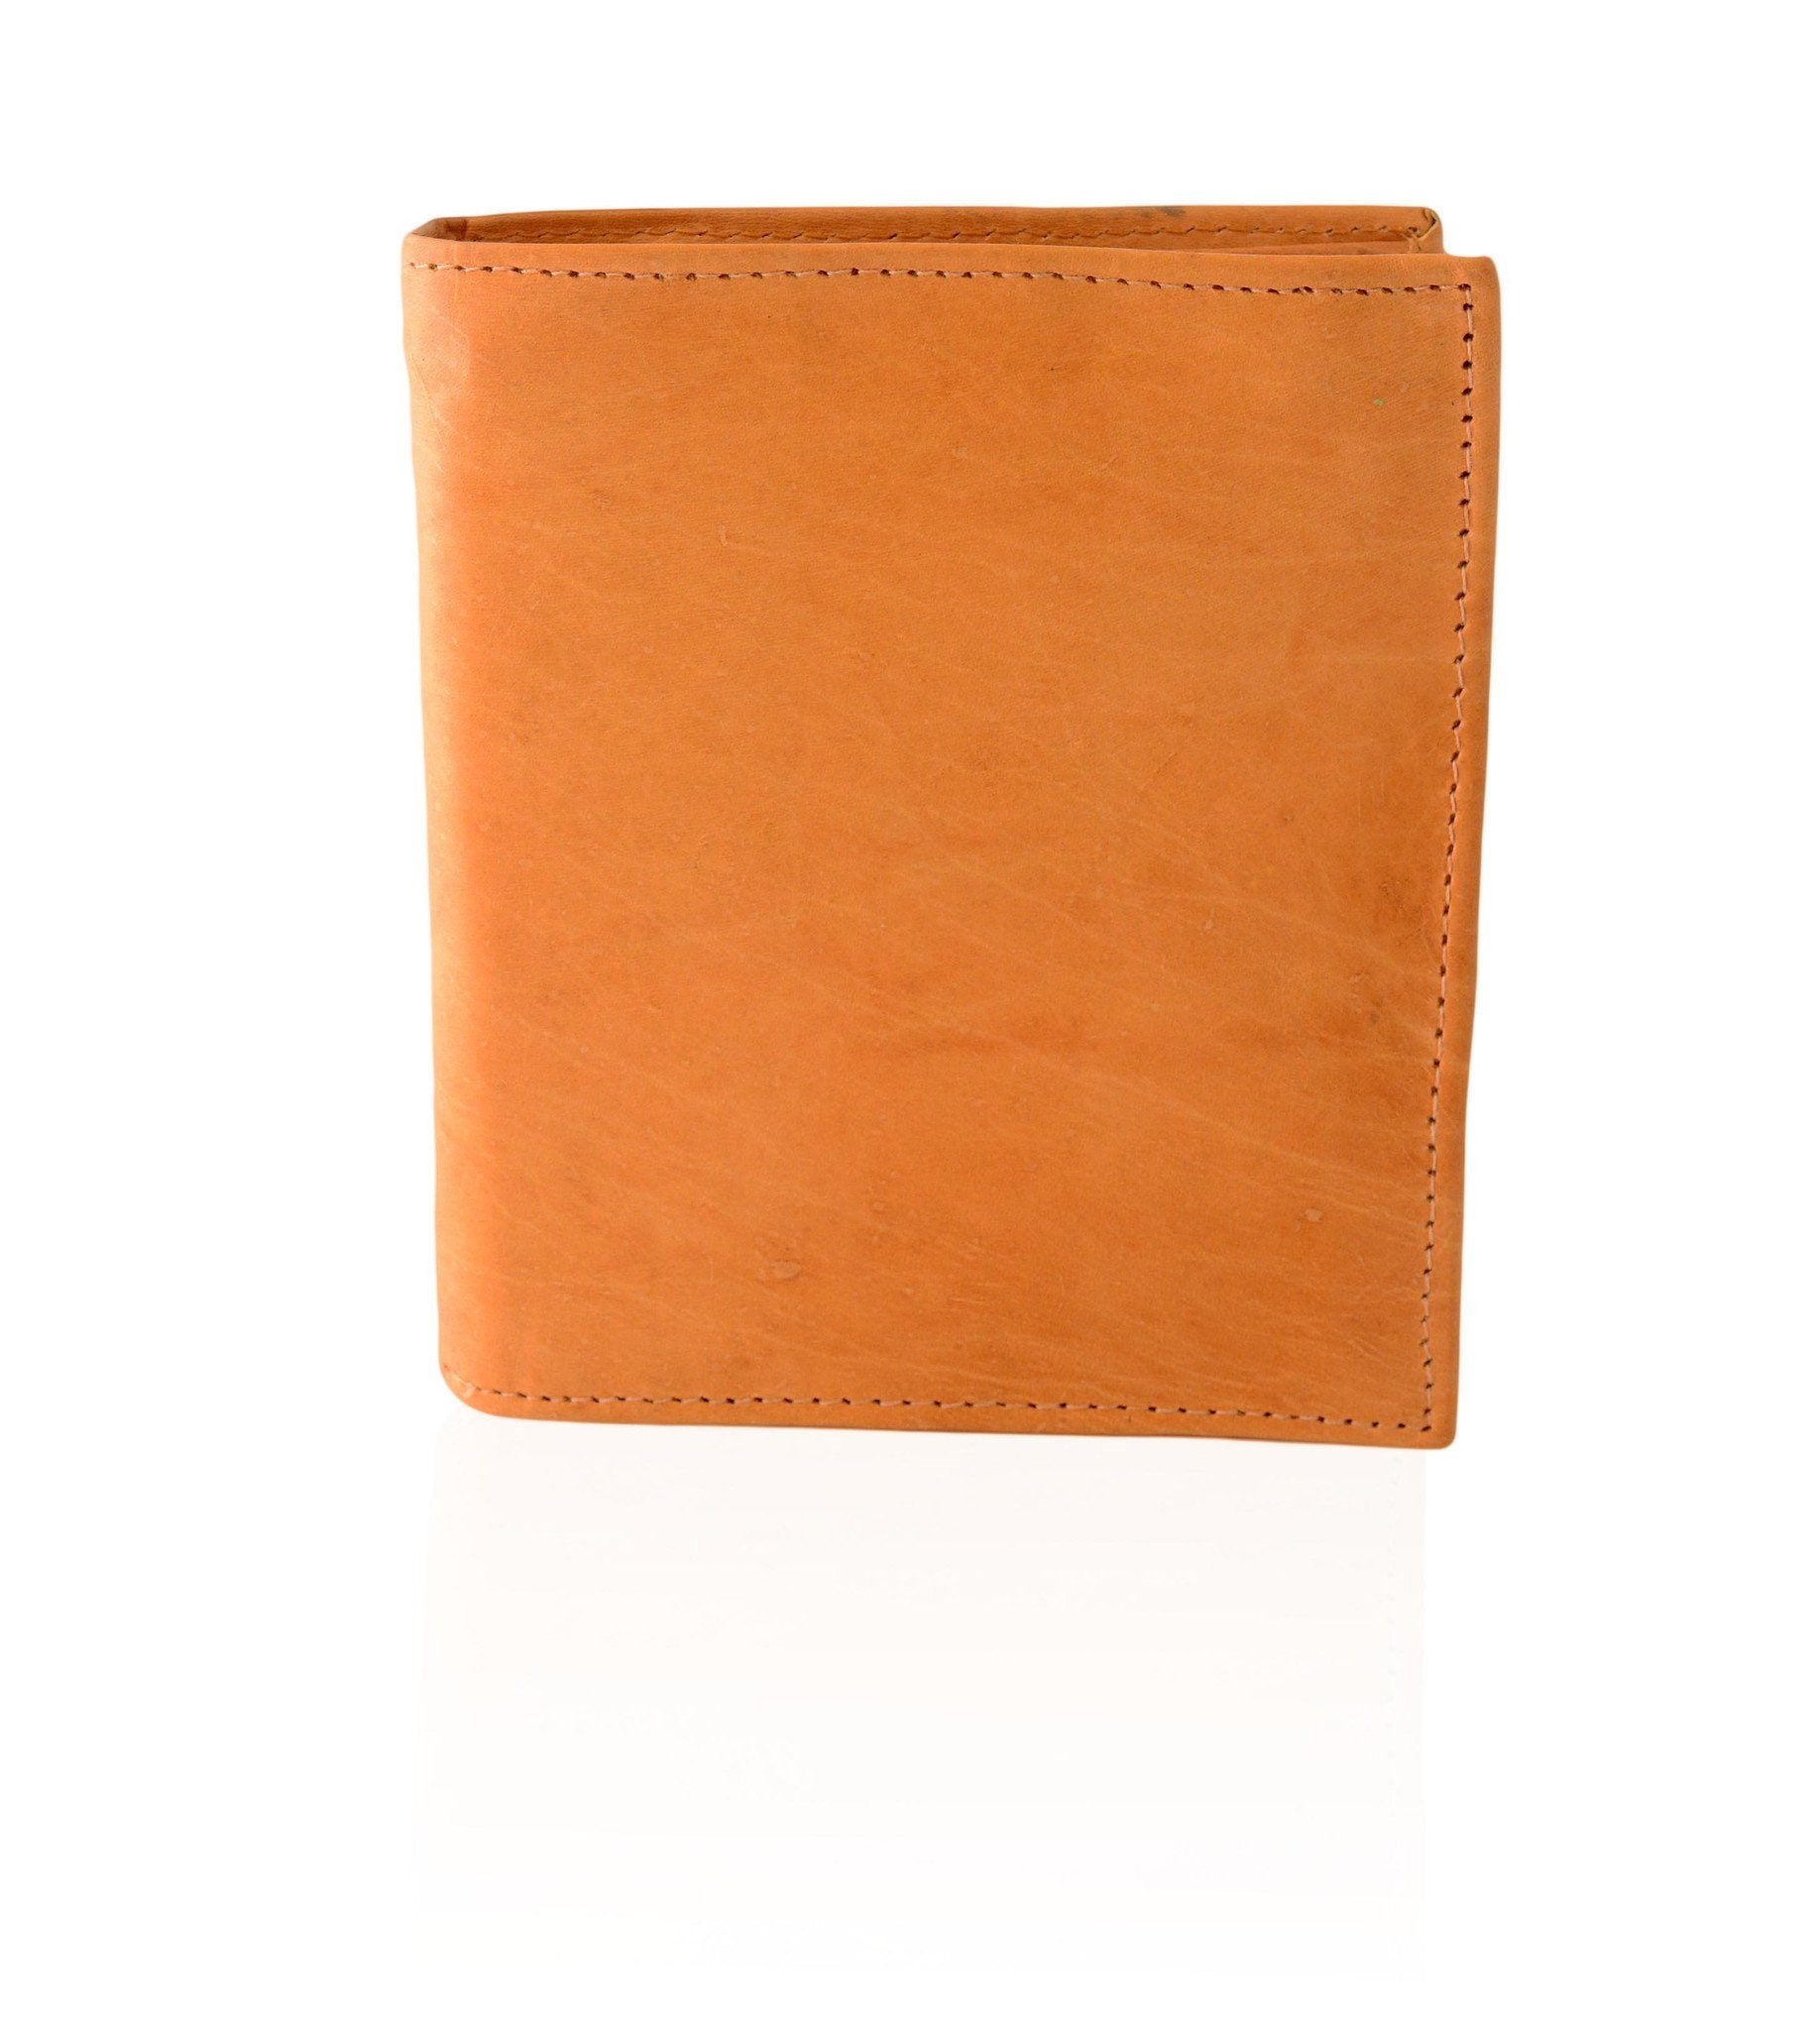 Deluxe RFID-Blocking Soft Genuine Leather Bifold Wallet For Men - Brown